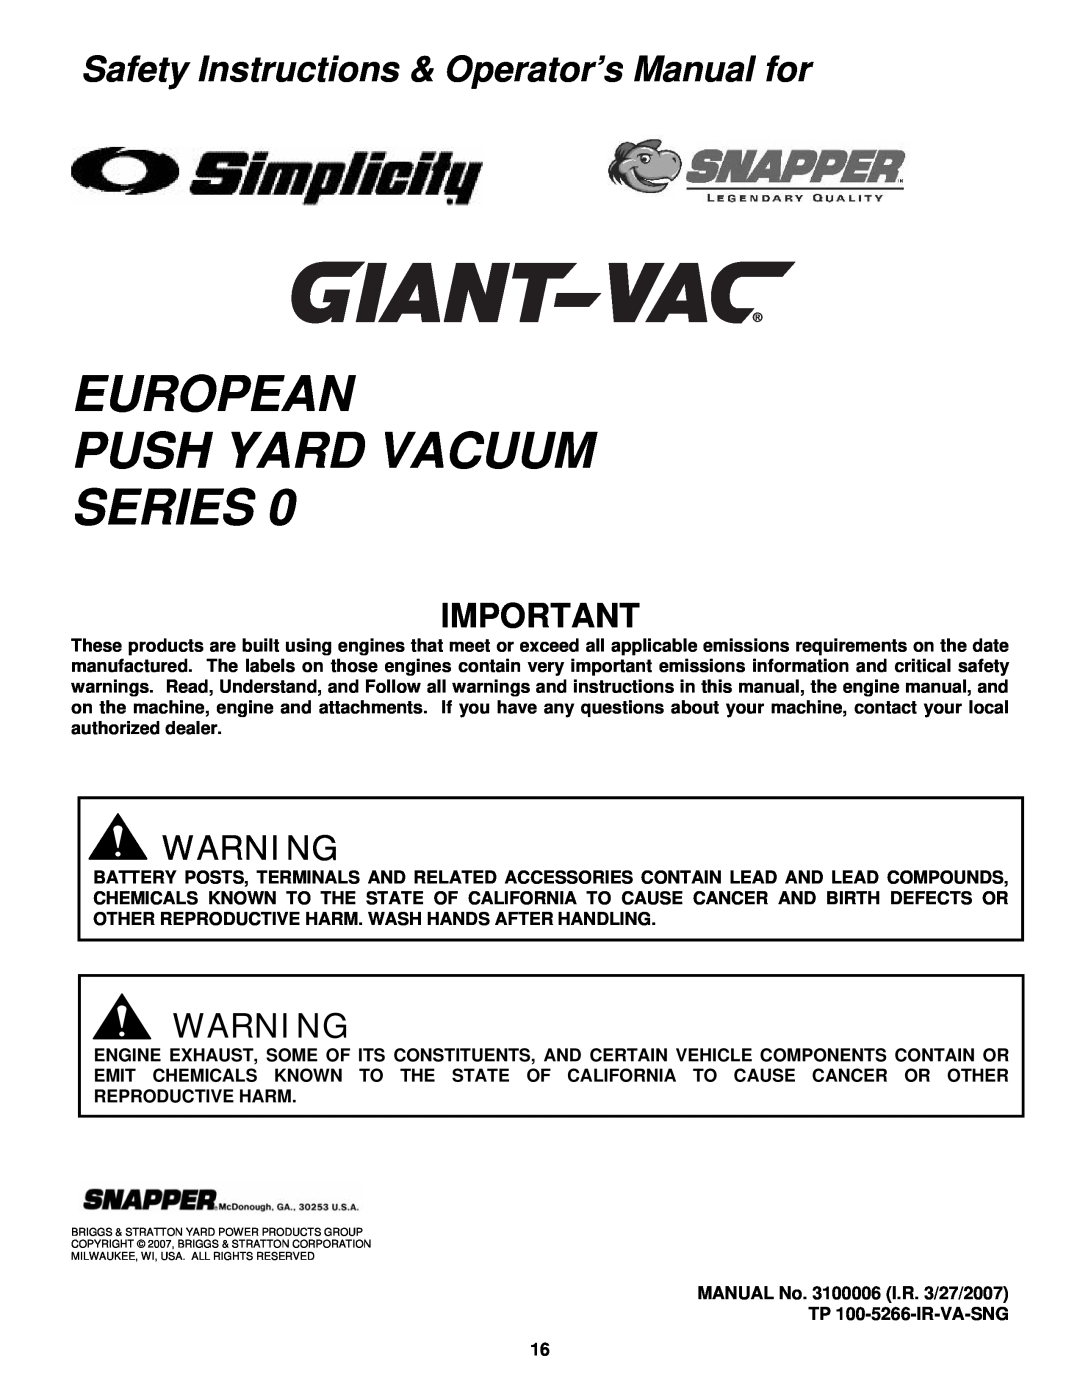 Snapper SV25550HV European Push Yard Vacuum Series, Safety Instructions & Operator’s Manual for 